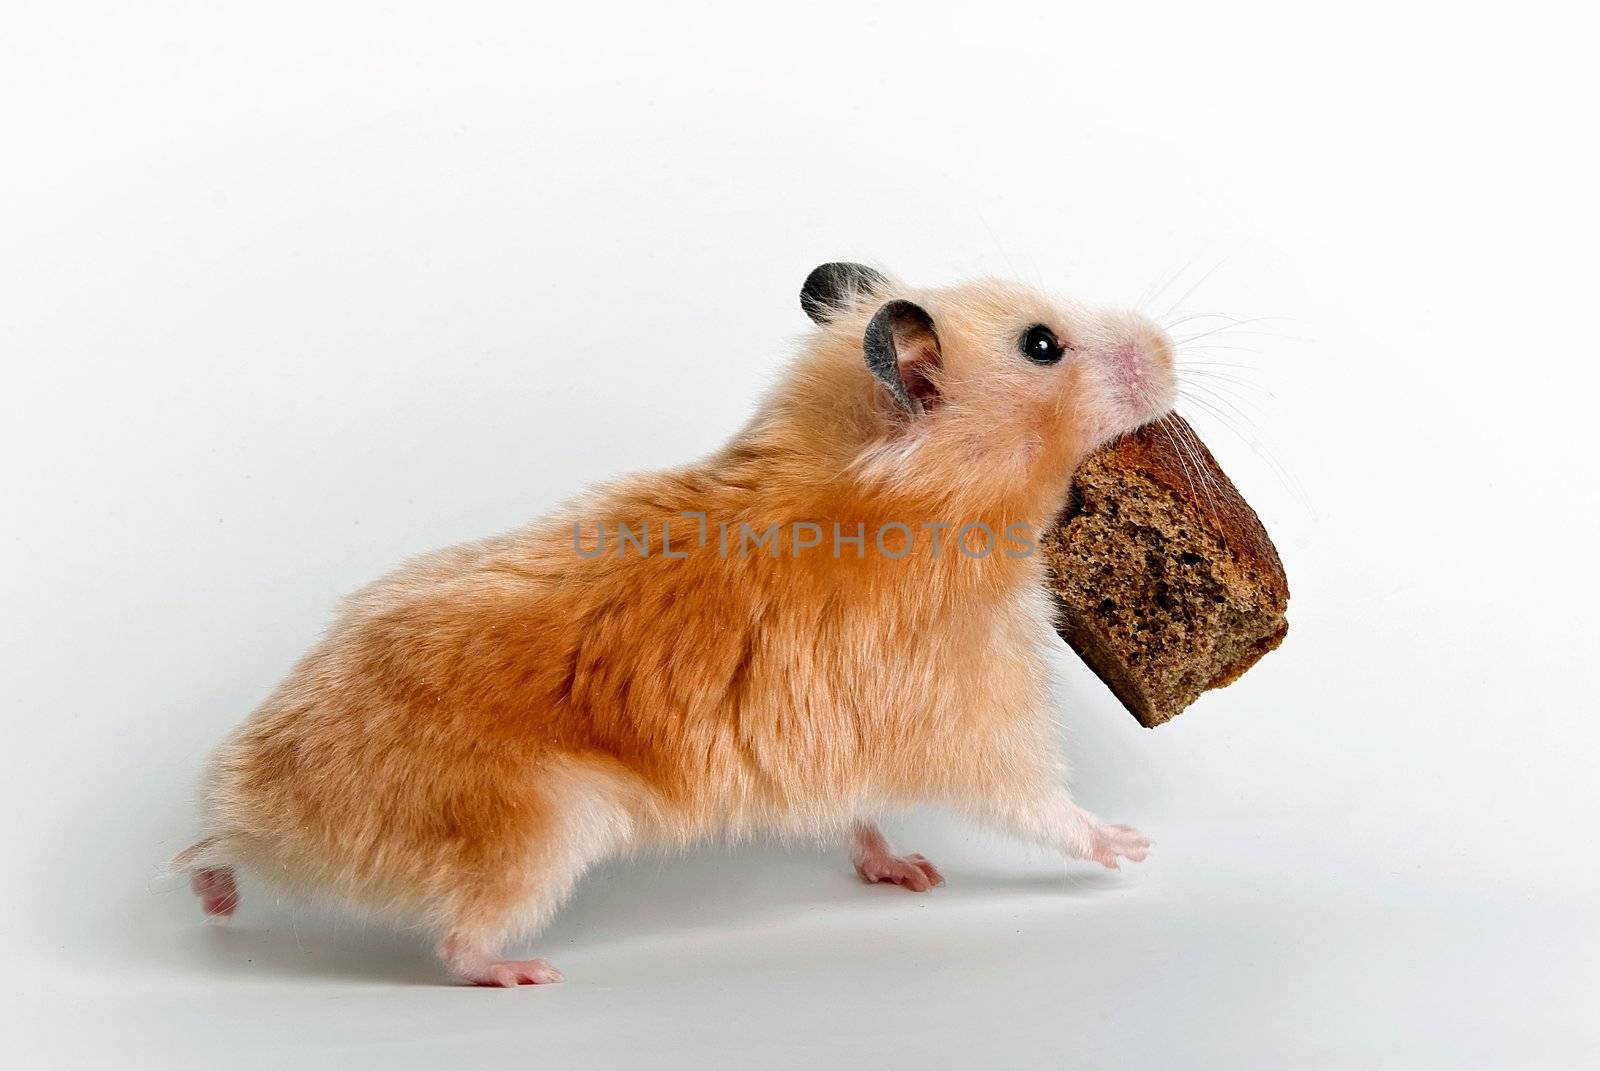 Hamster with a bread crust